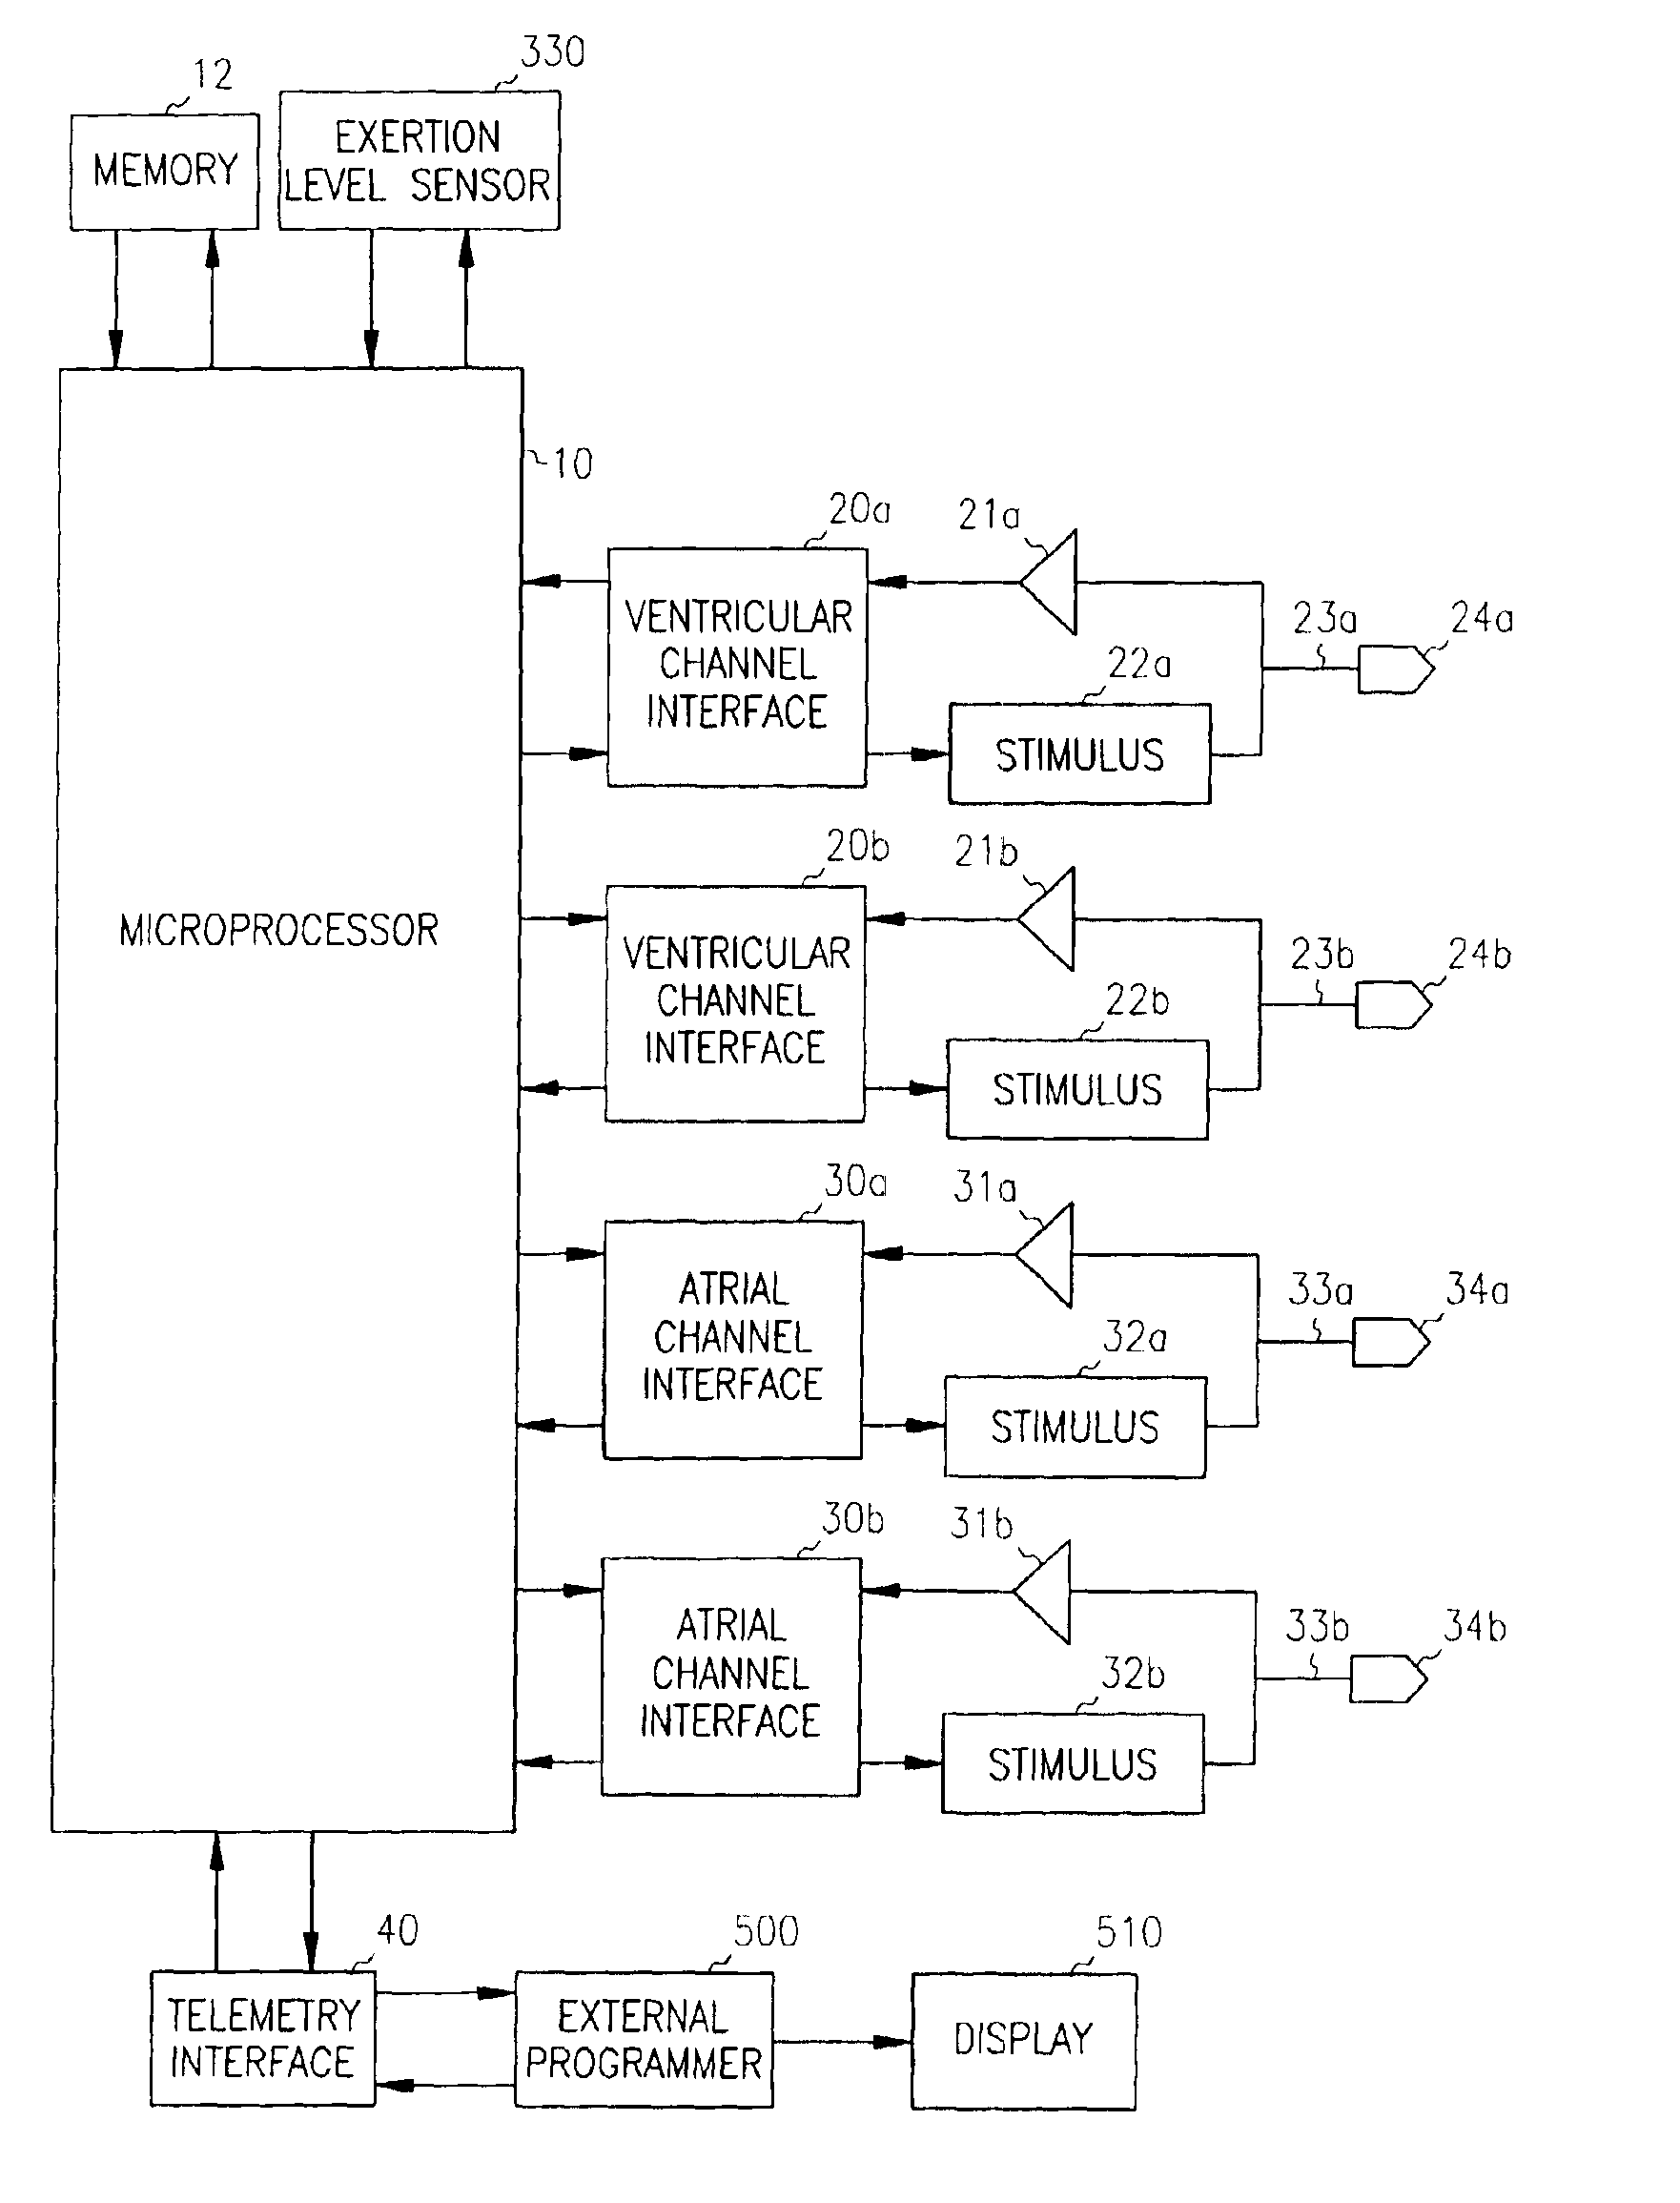 Method and apparatus for maintaining synchronized pacing